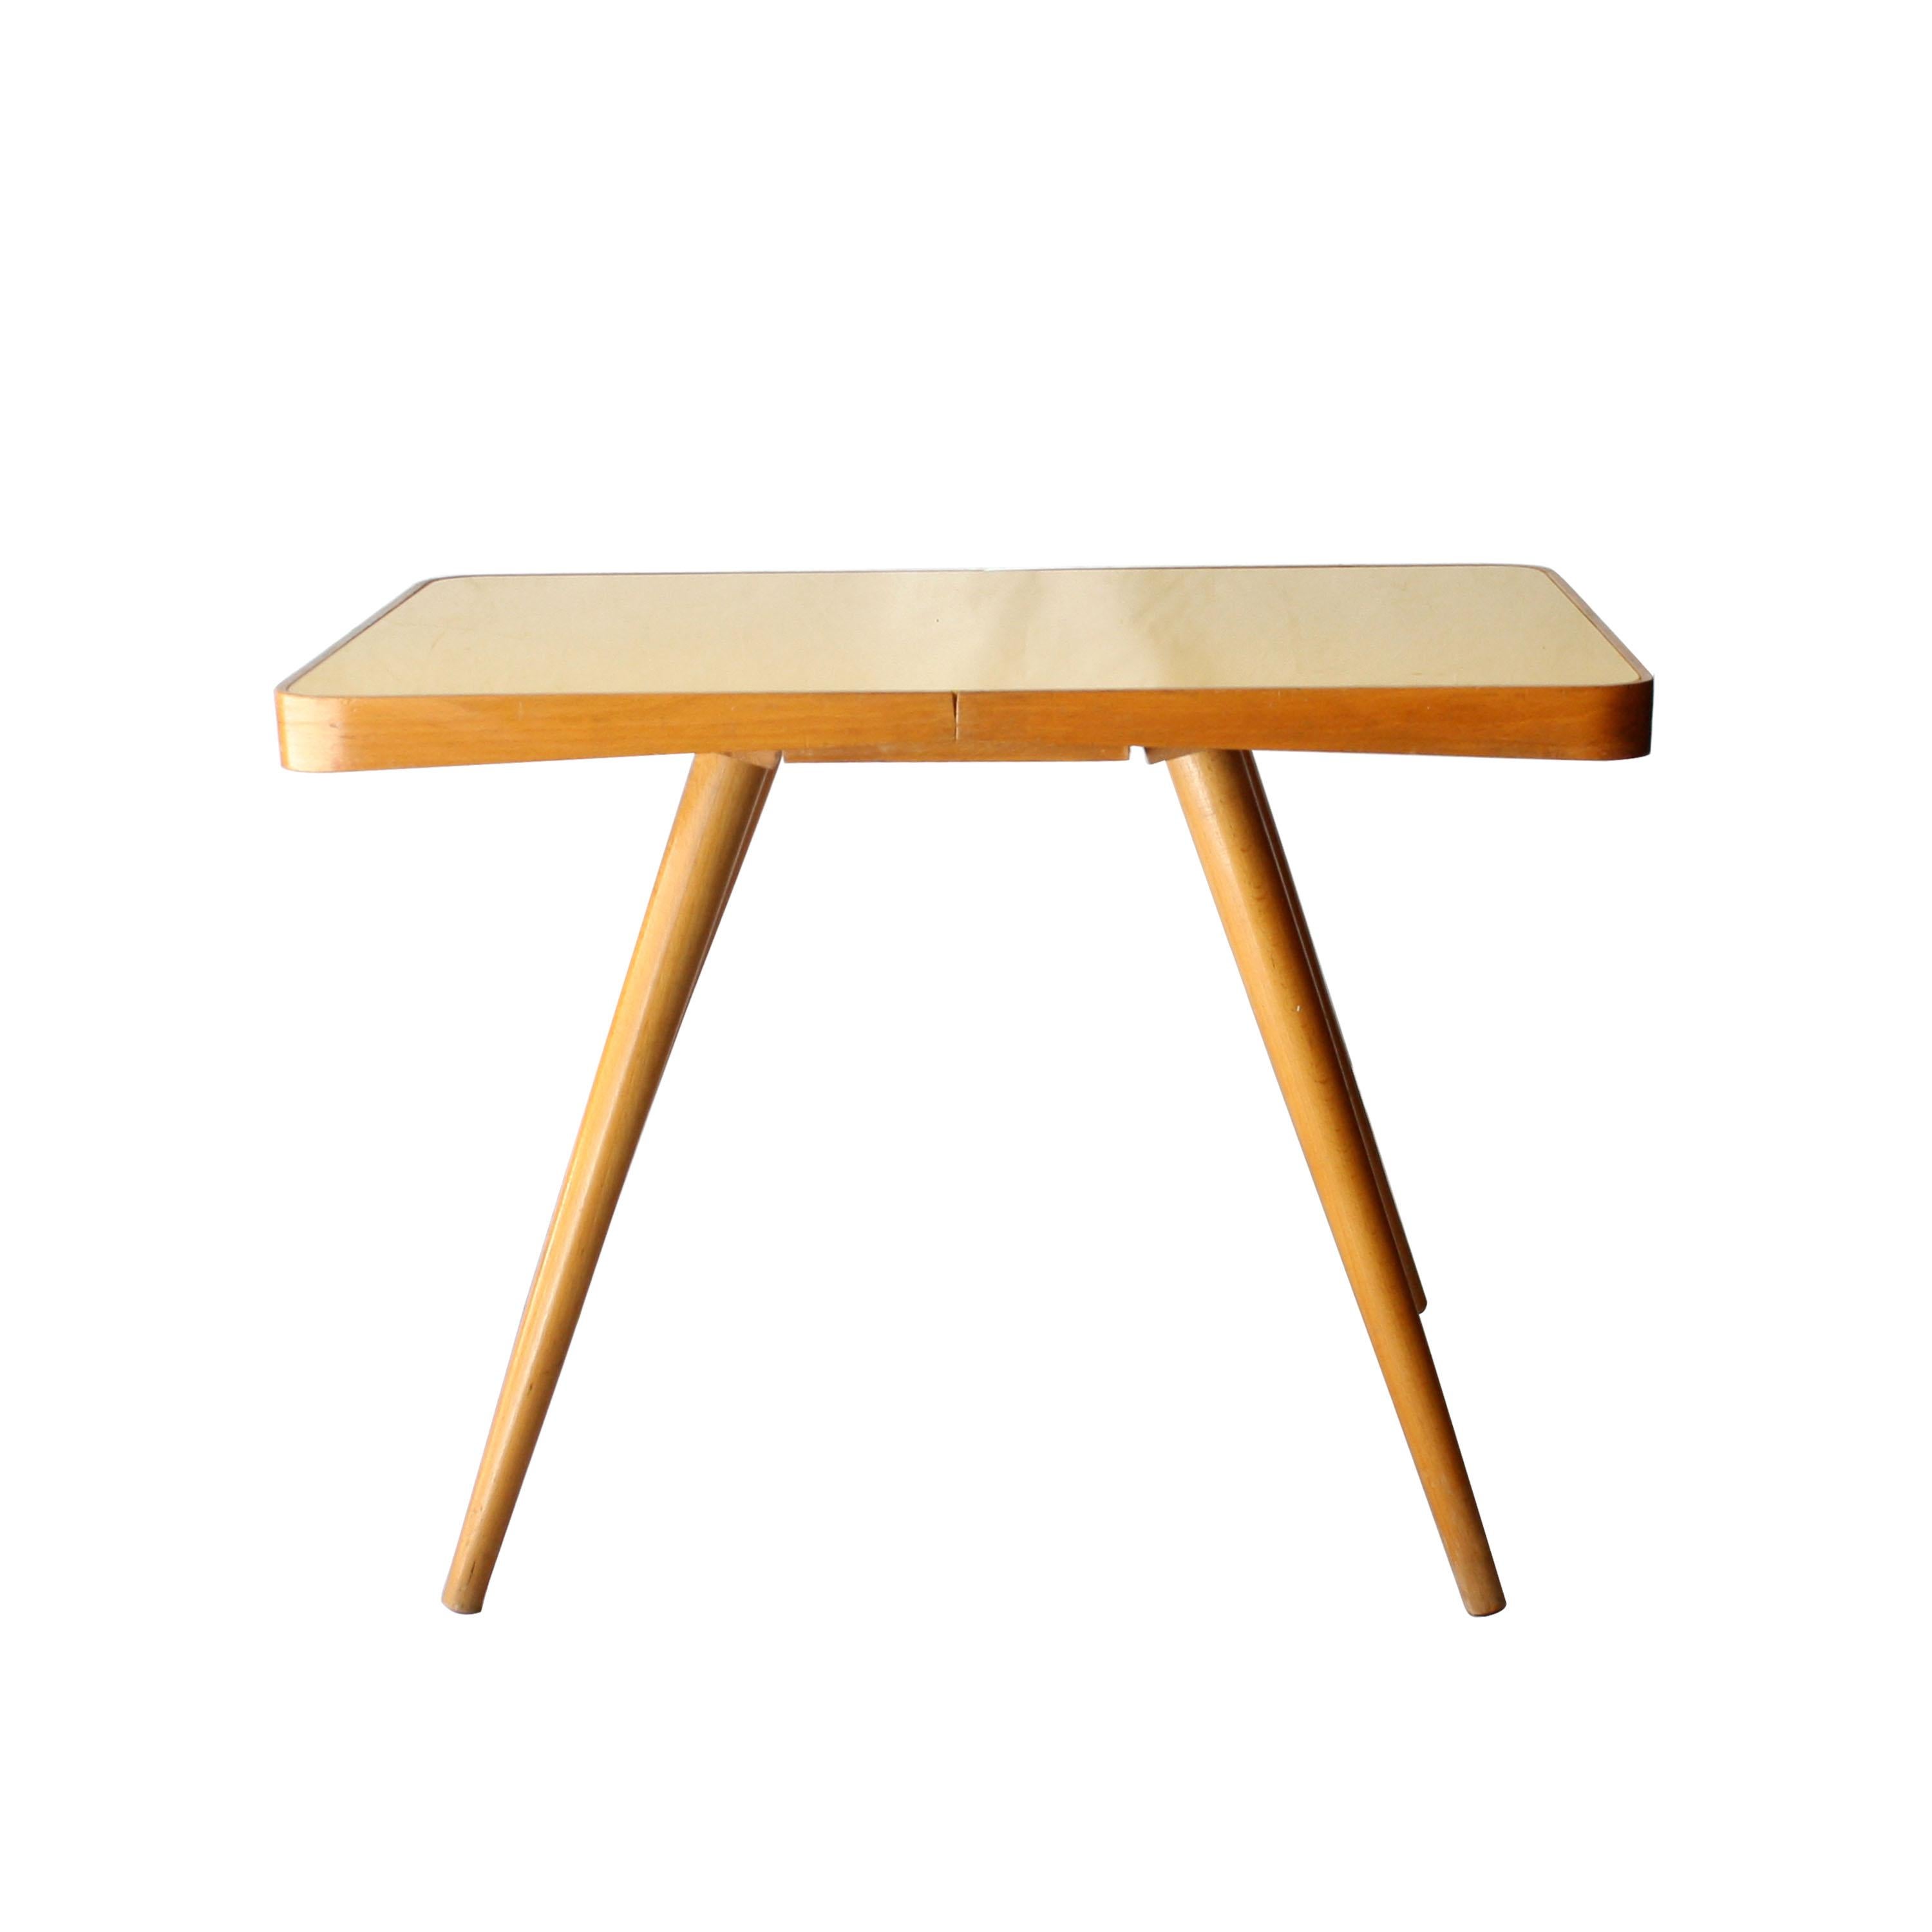 Oak structure table with conical legs and yellow glass top.